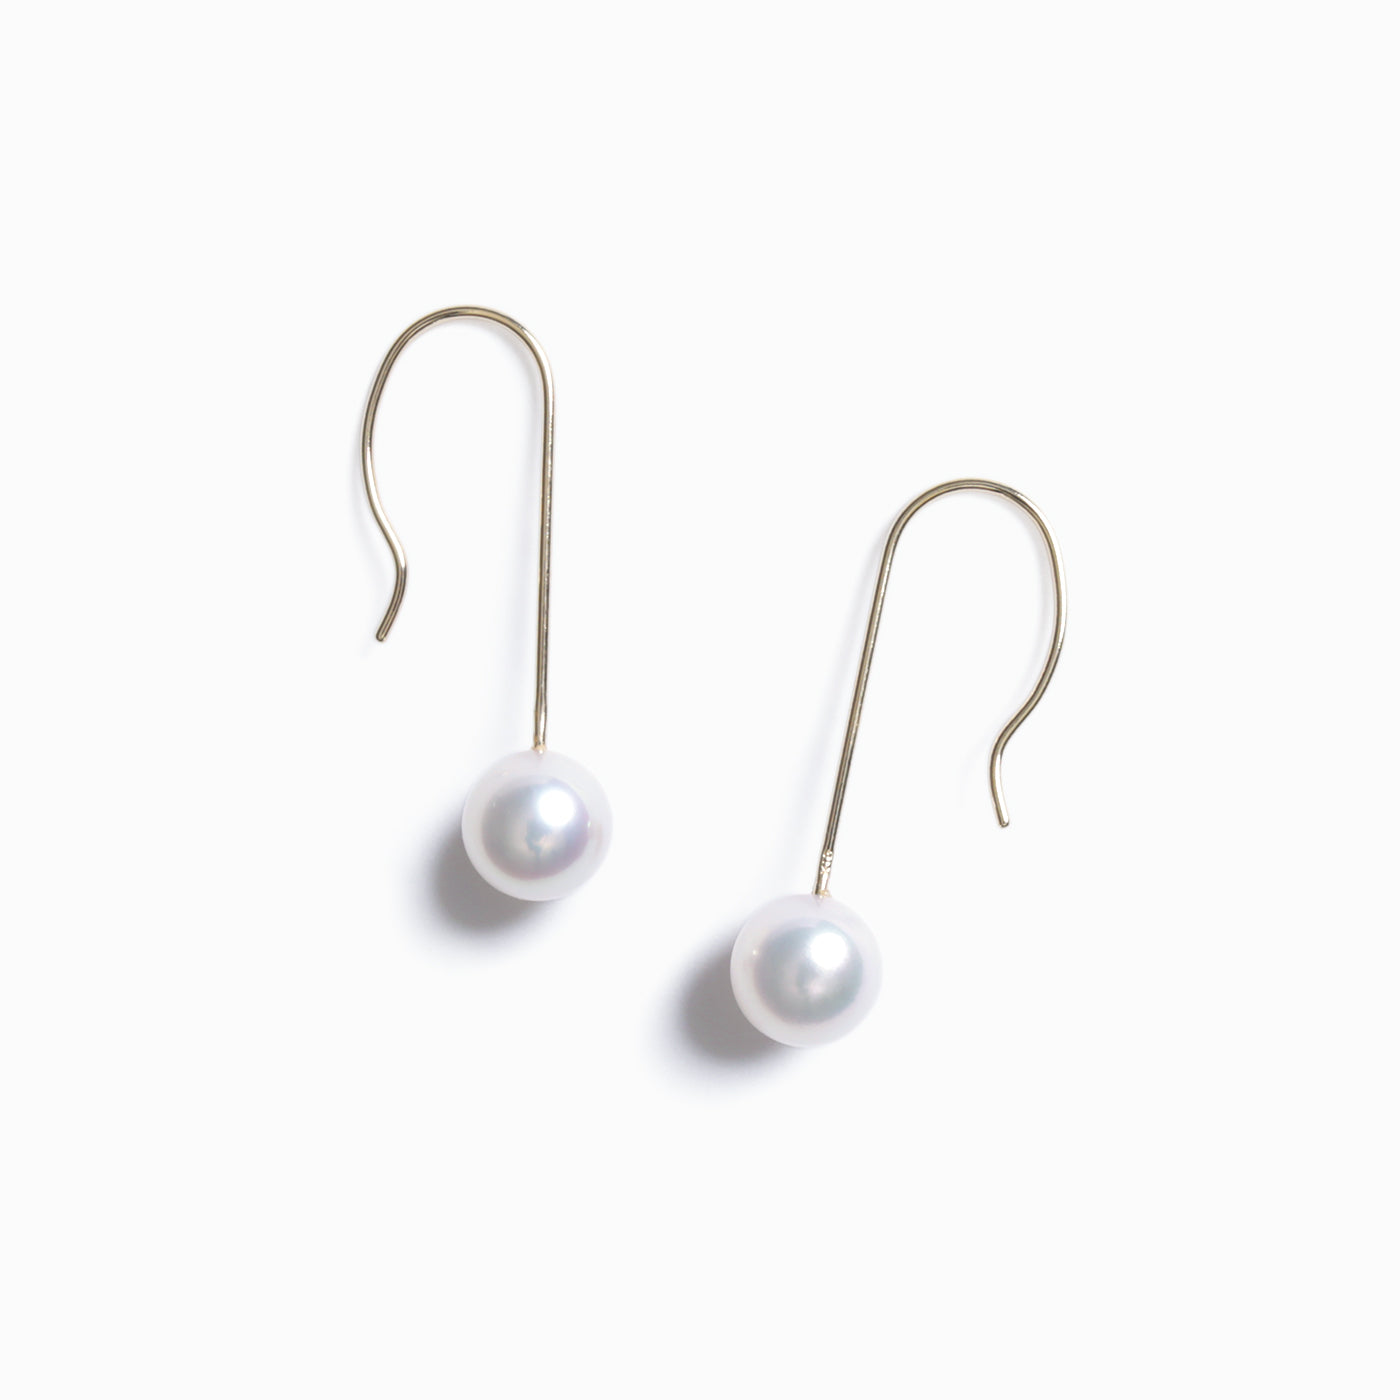 【OUTLET】18K YG Eighth Note Earrings - アコヤパール